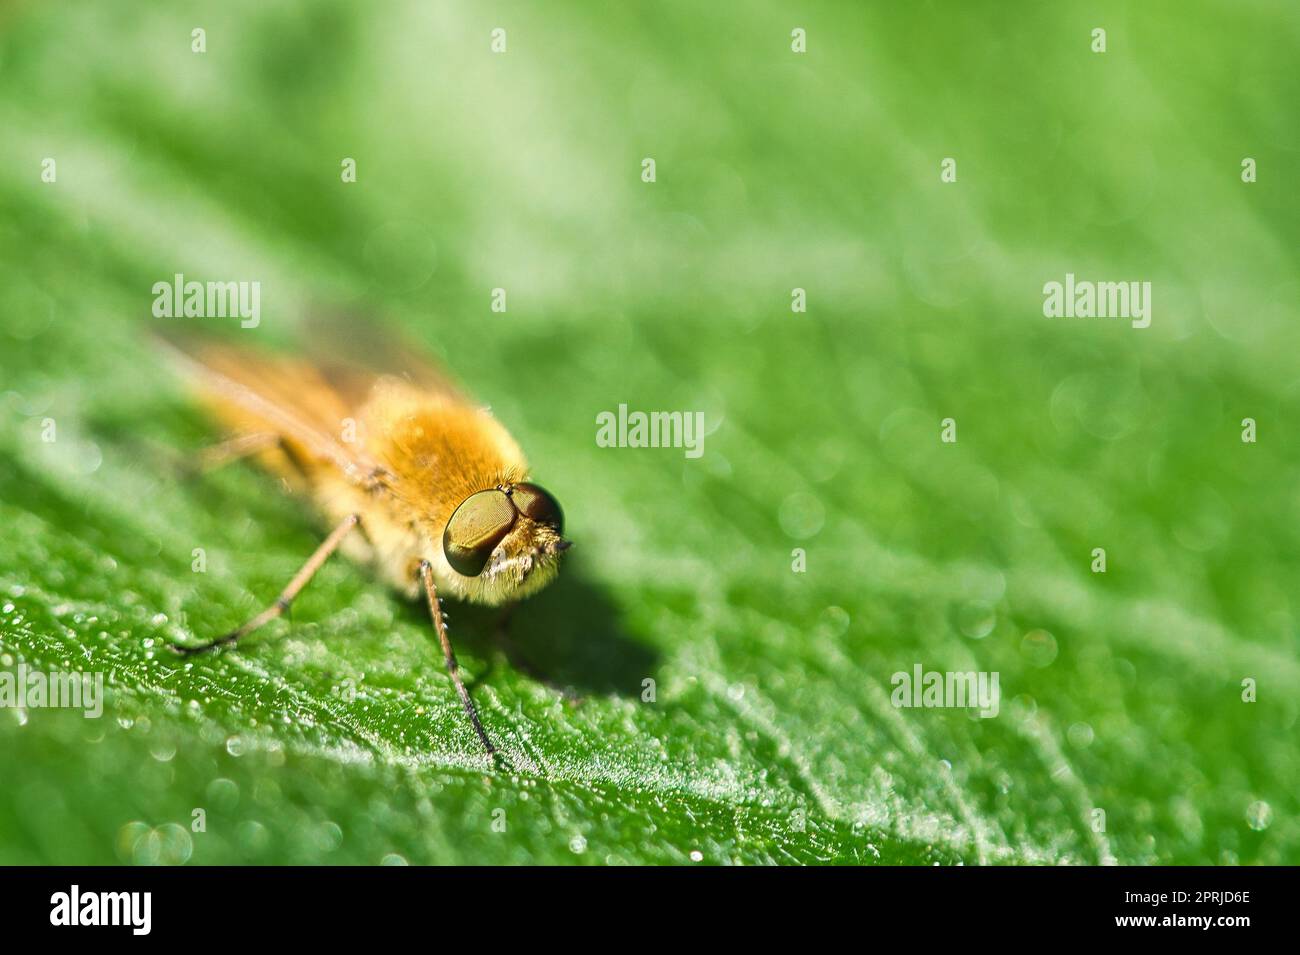 Hair rings fly on a green leaf. Sunshine on the insect. Macro shot Stock Photo